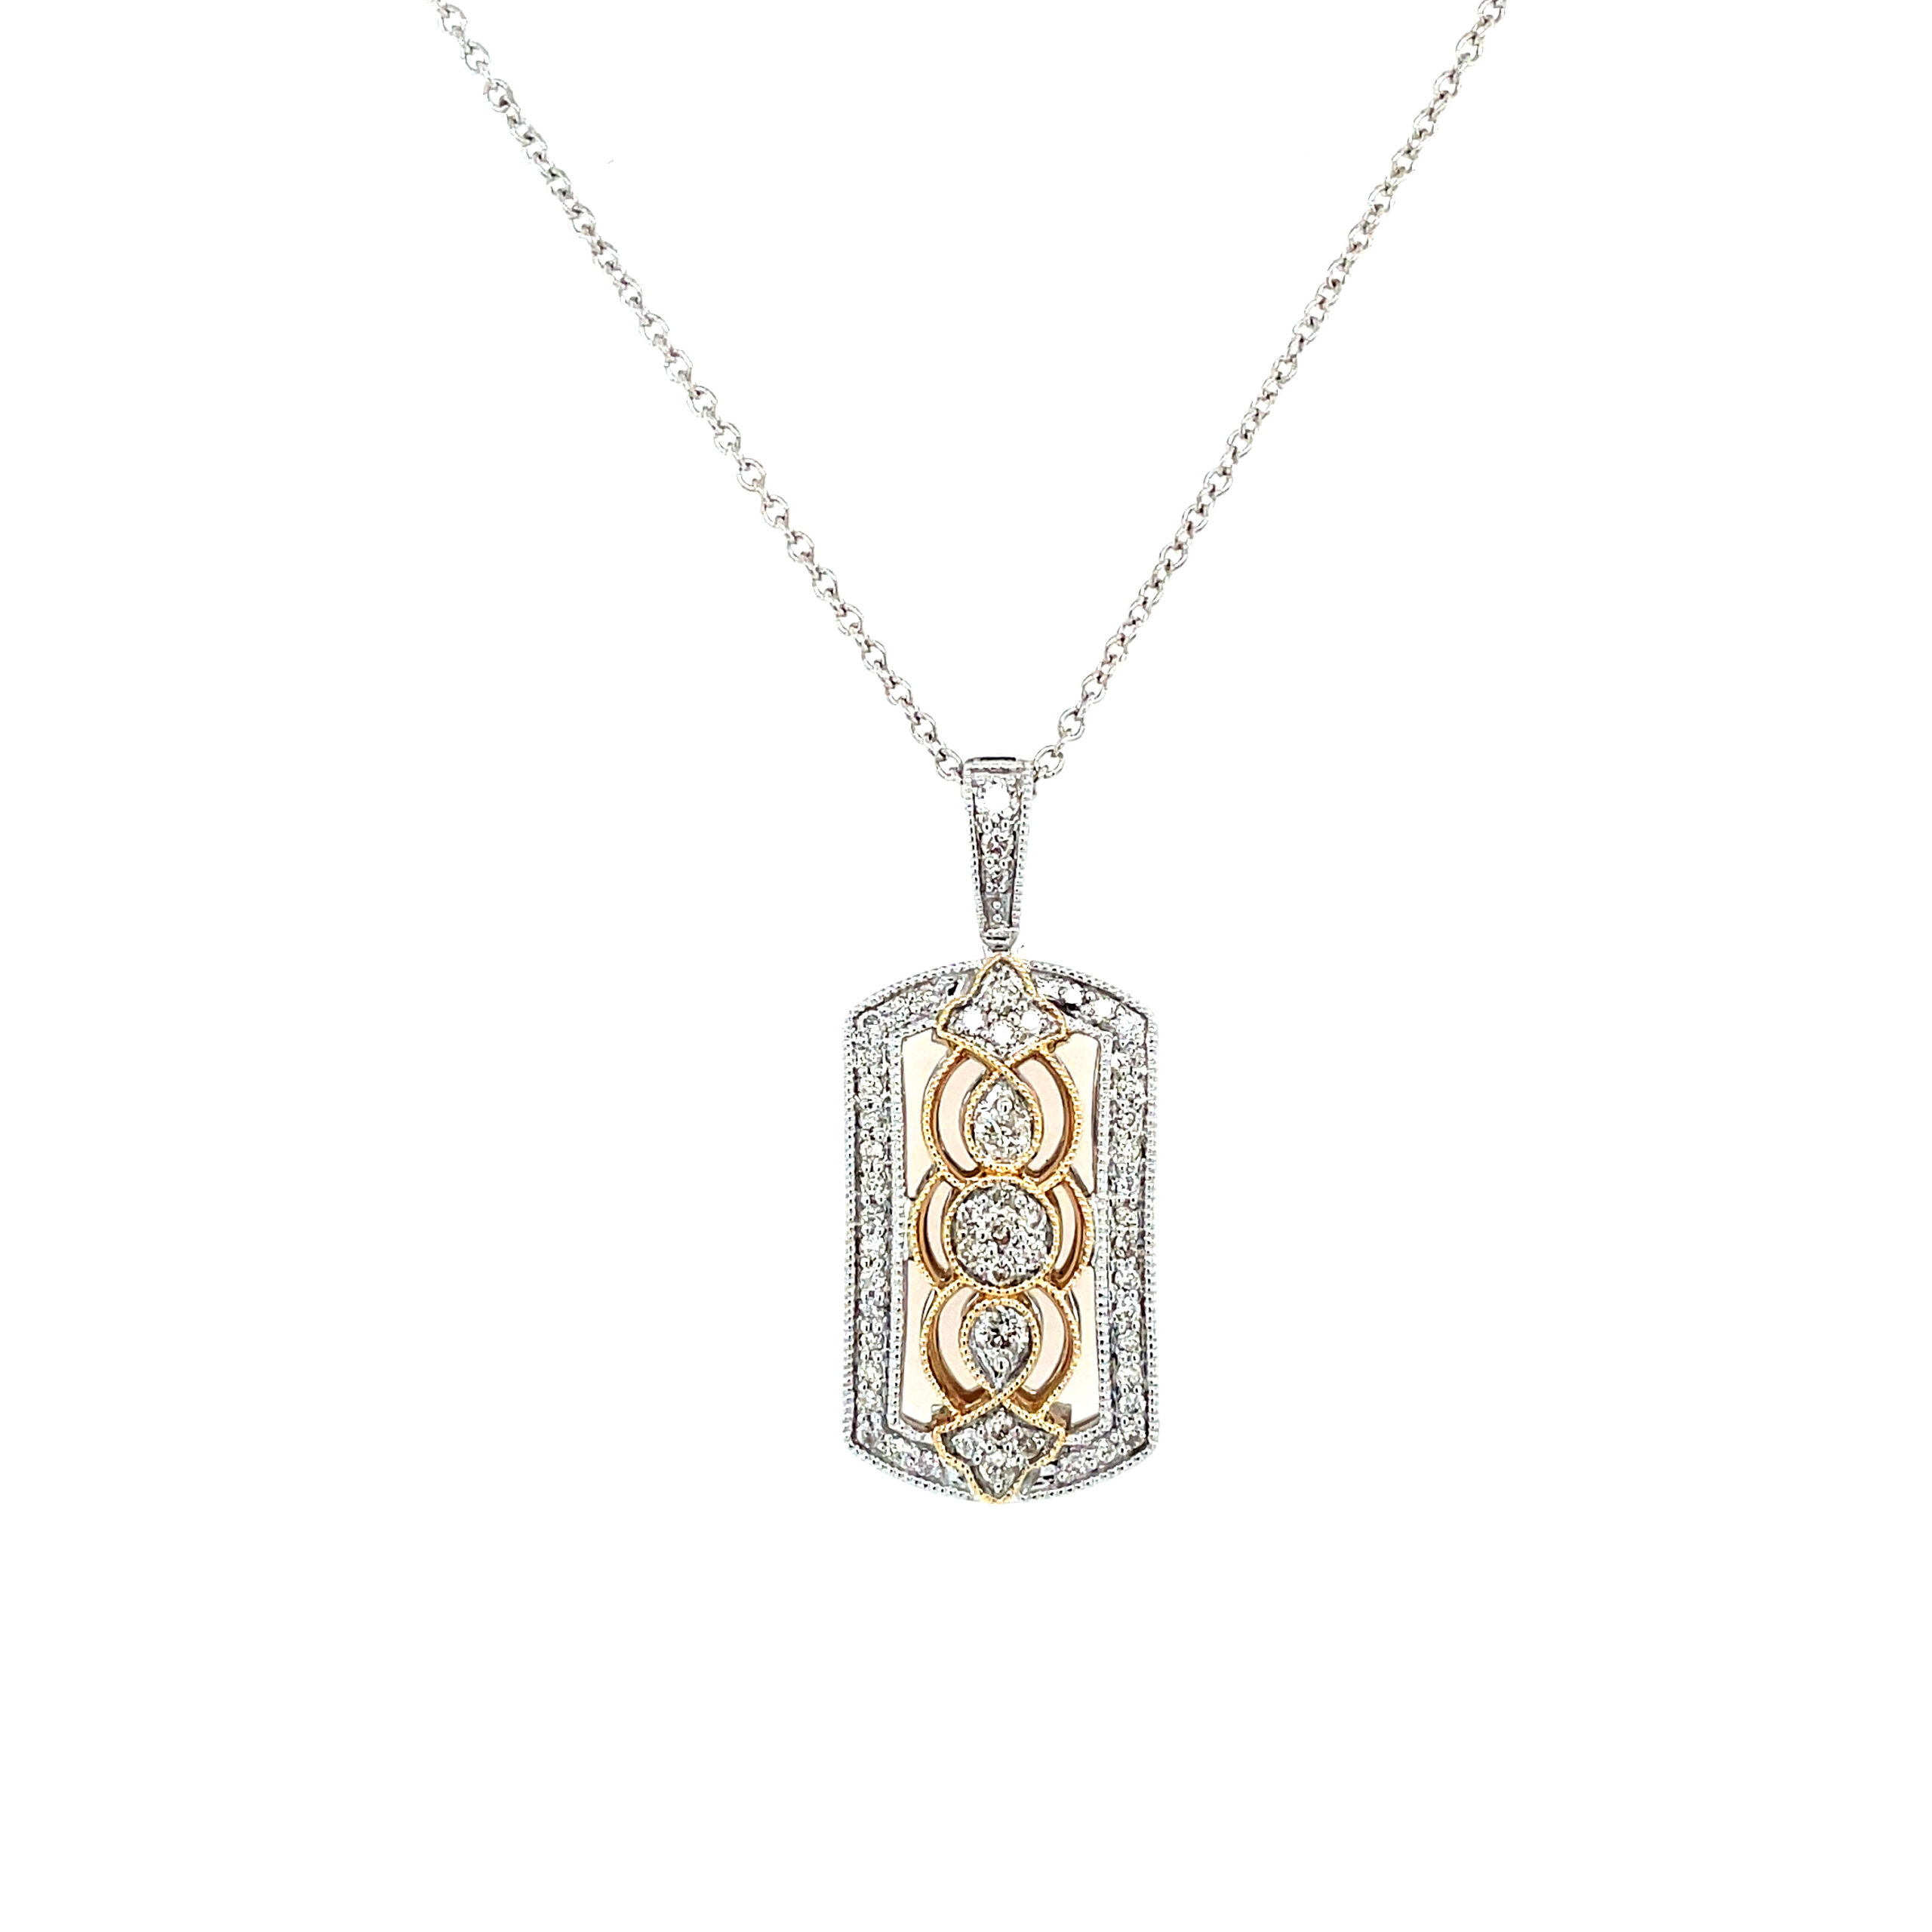 Two-Tone Gold Antique-Inspired Diamond Necklace